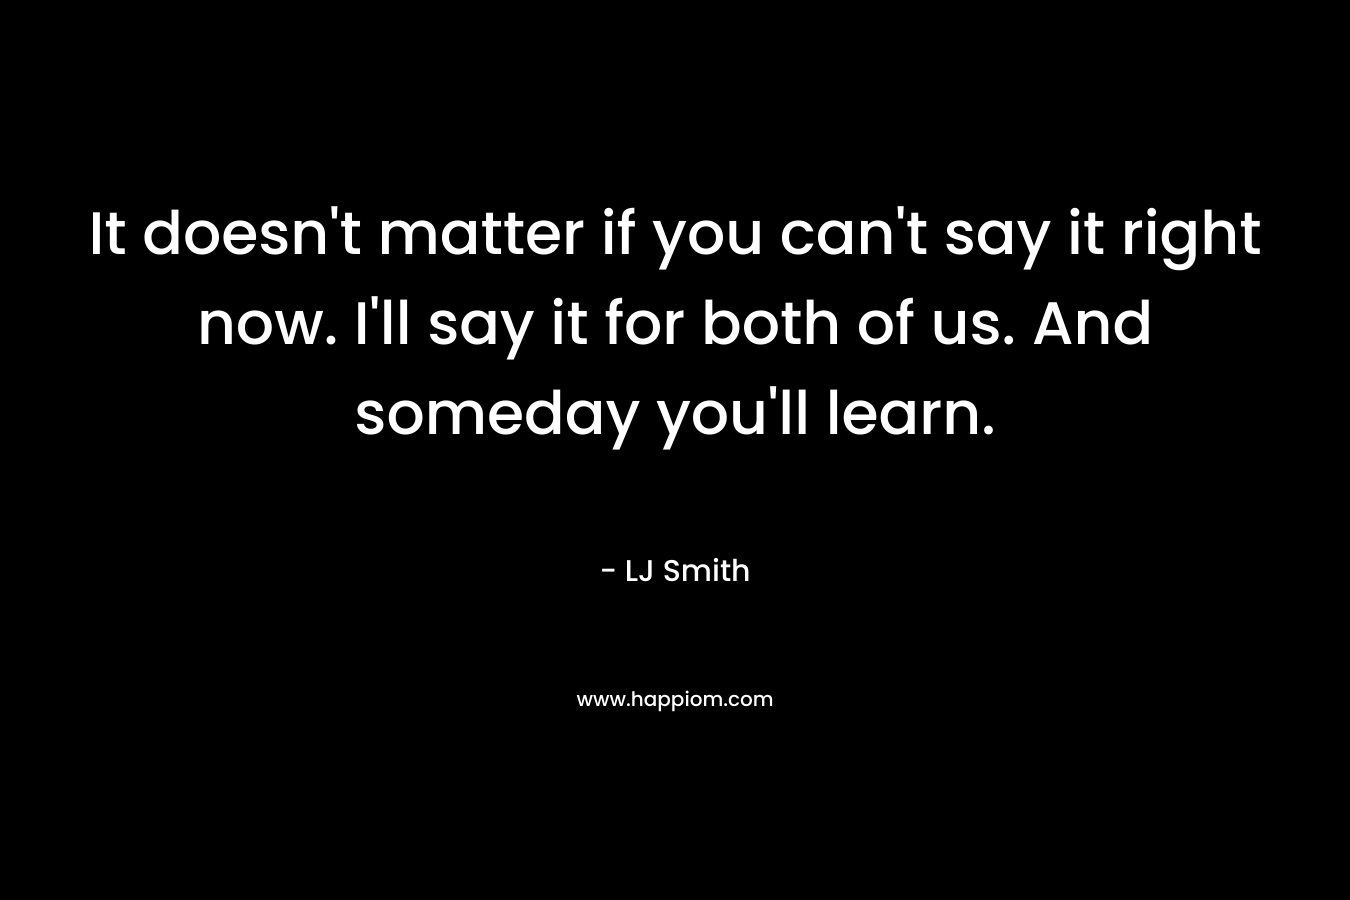 It doesn’t matter if you can’t say it right now. I’ll say it for both of us. And someday you’ll learn. – LJ Smith